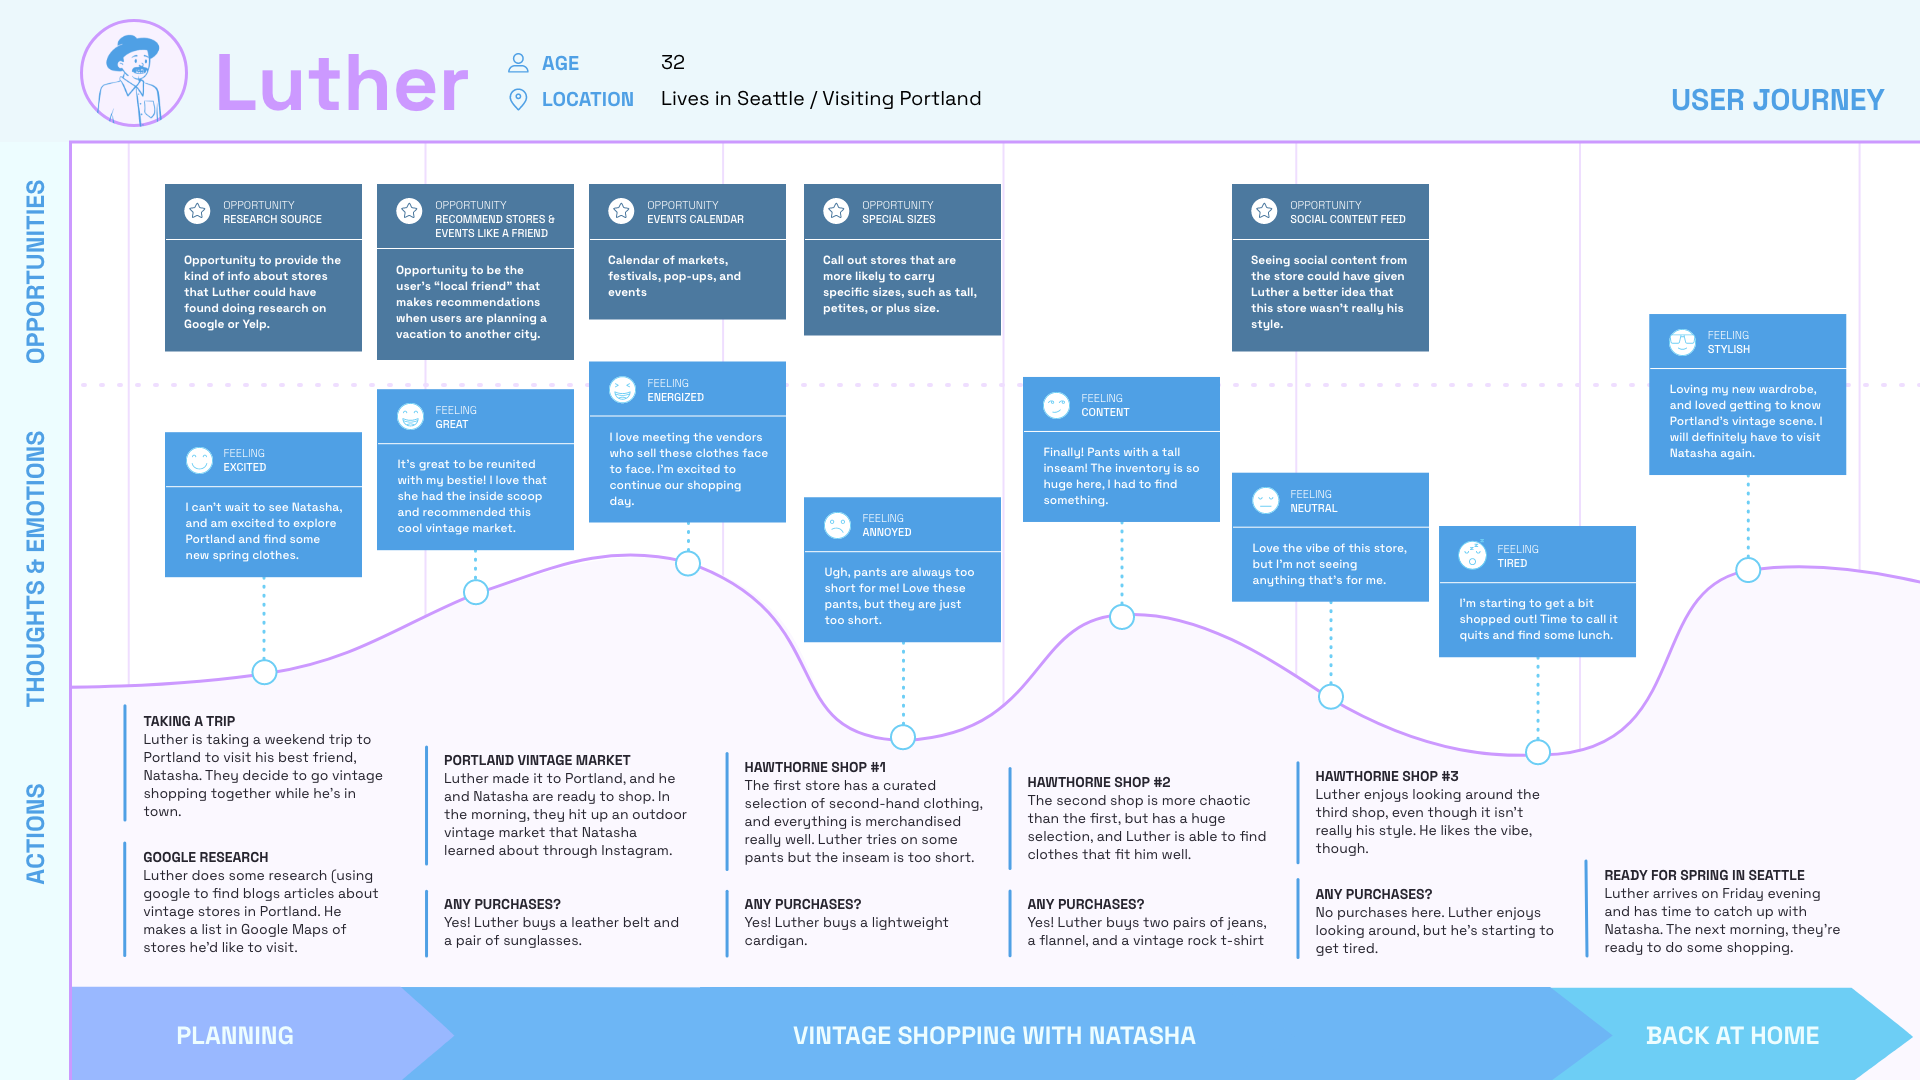 Luther's User Journey Map